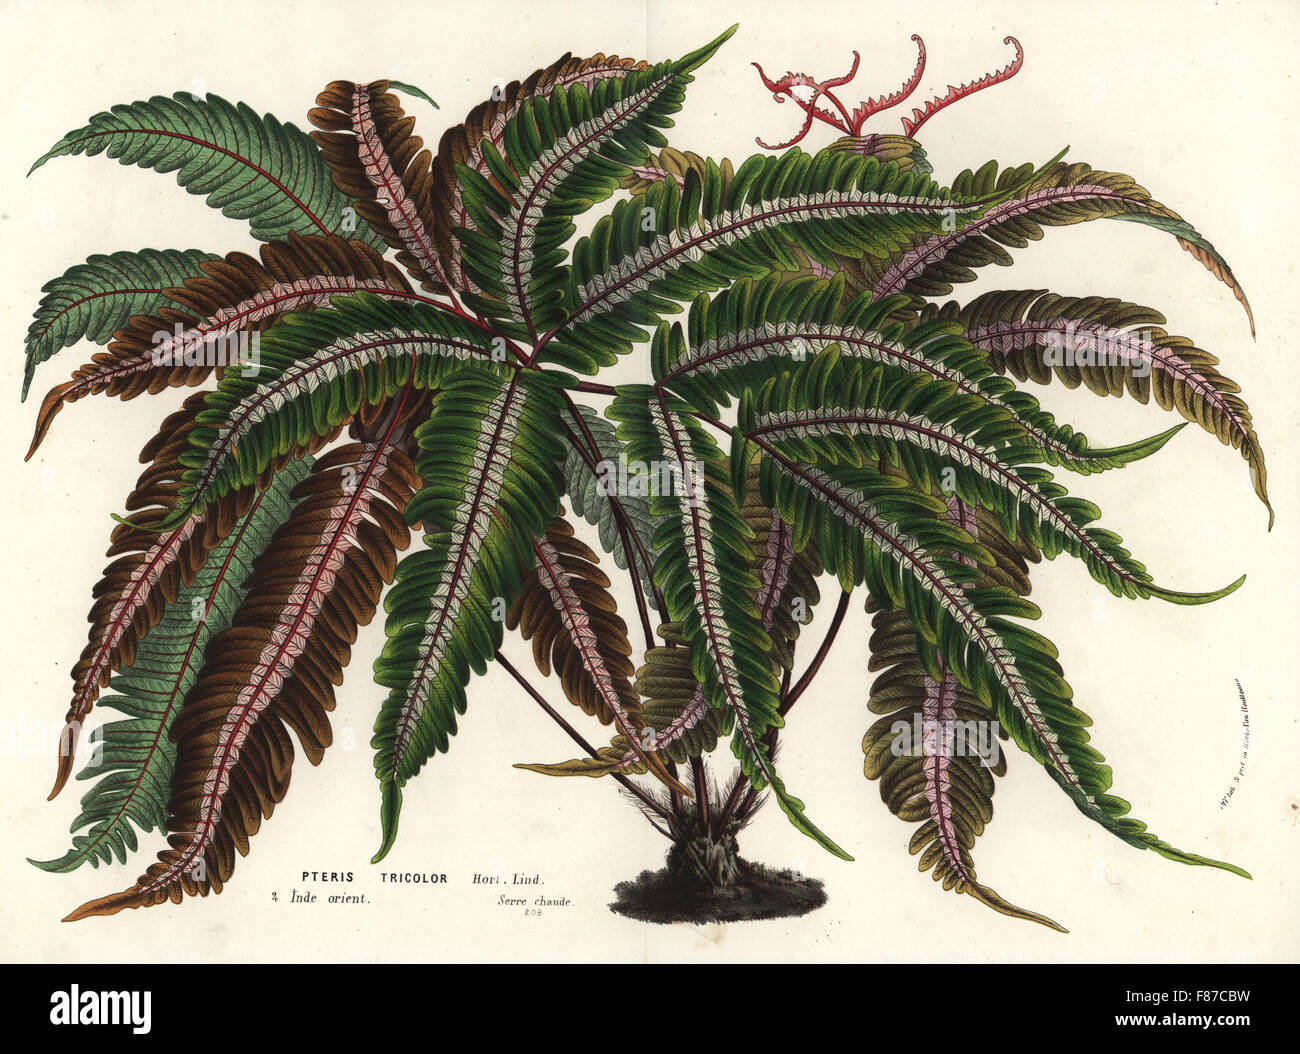 Brake fern, Pteris aspericaulis (Pteris tricolor). Handcoloured lithograph from Louis van Houtte and Charles Lemaire's Flowers of the Gardens and Hothouses of Europe, Flore des Serres et des Jardins de l'Europe, Ghent, Belgium, 1870. Stock Photo